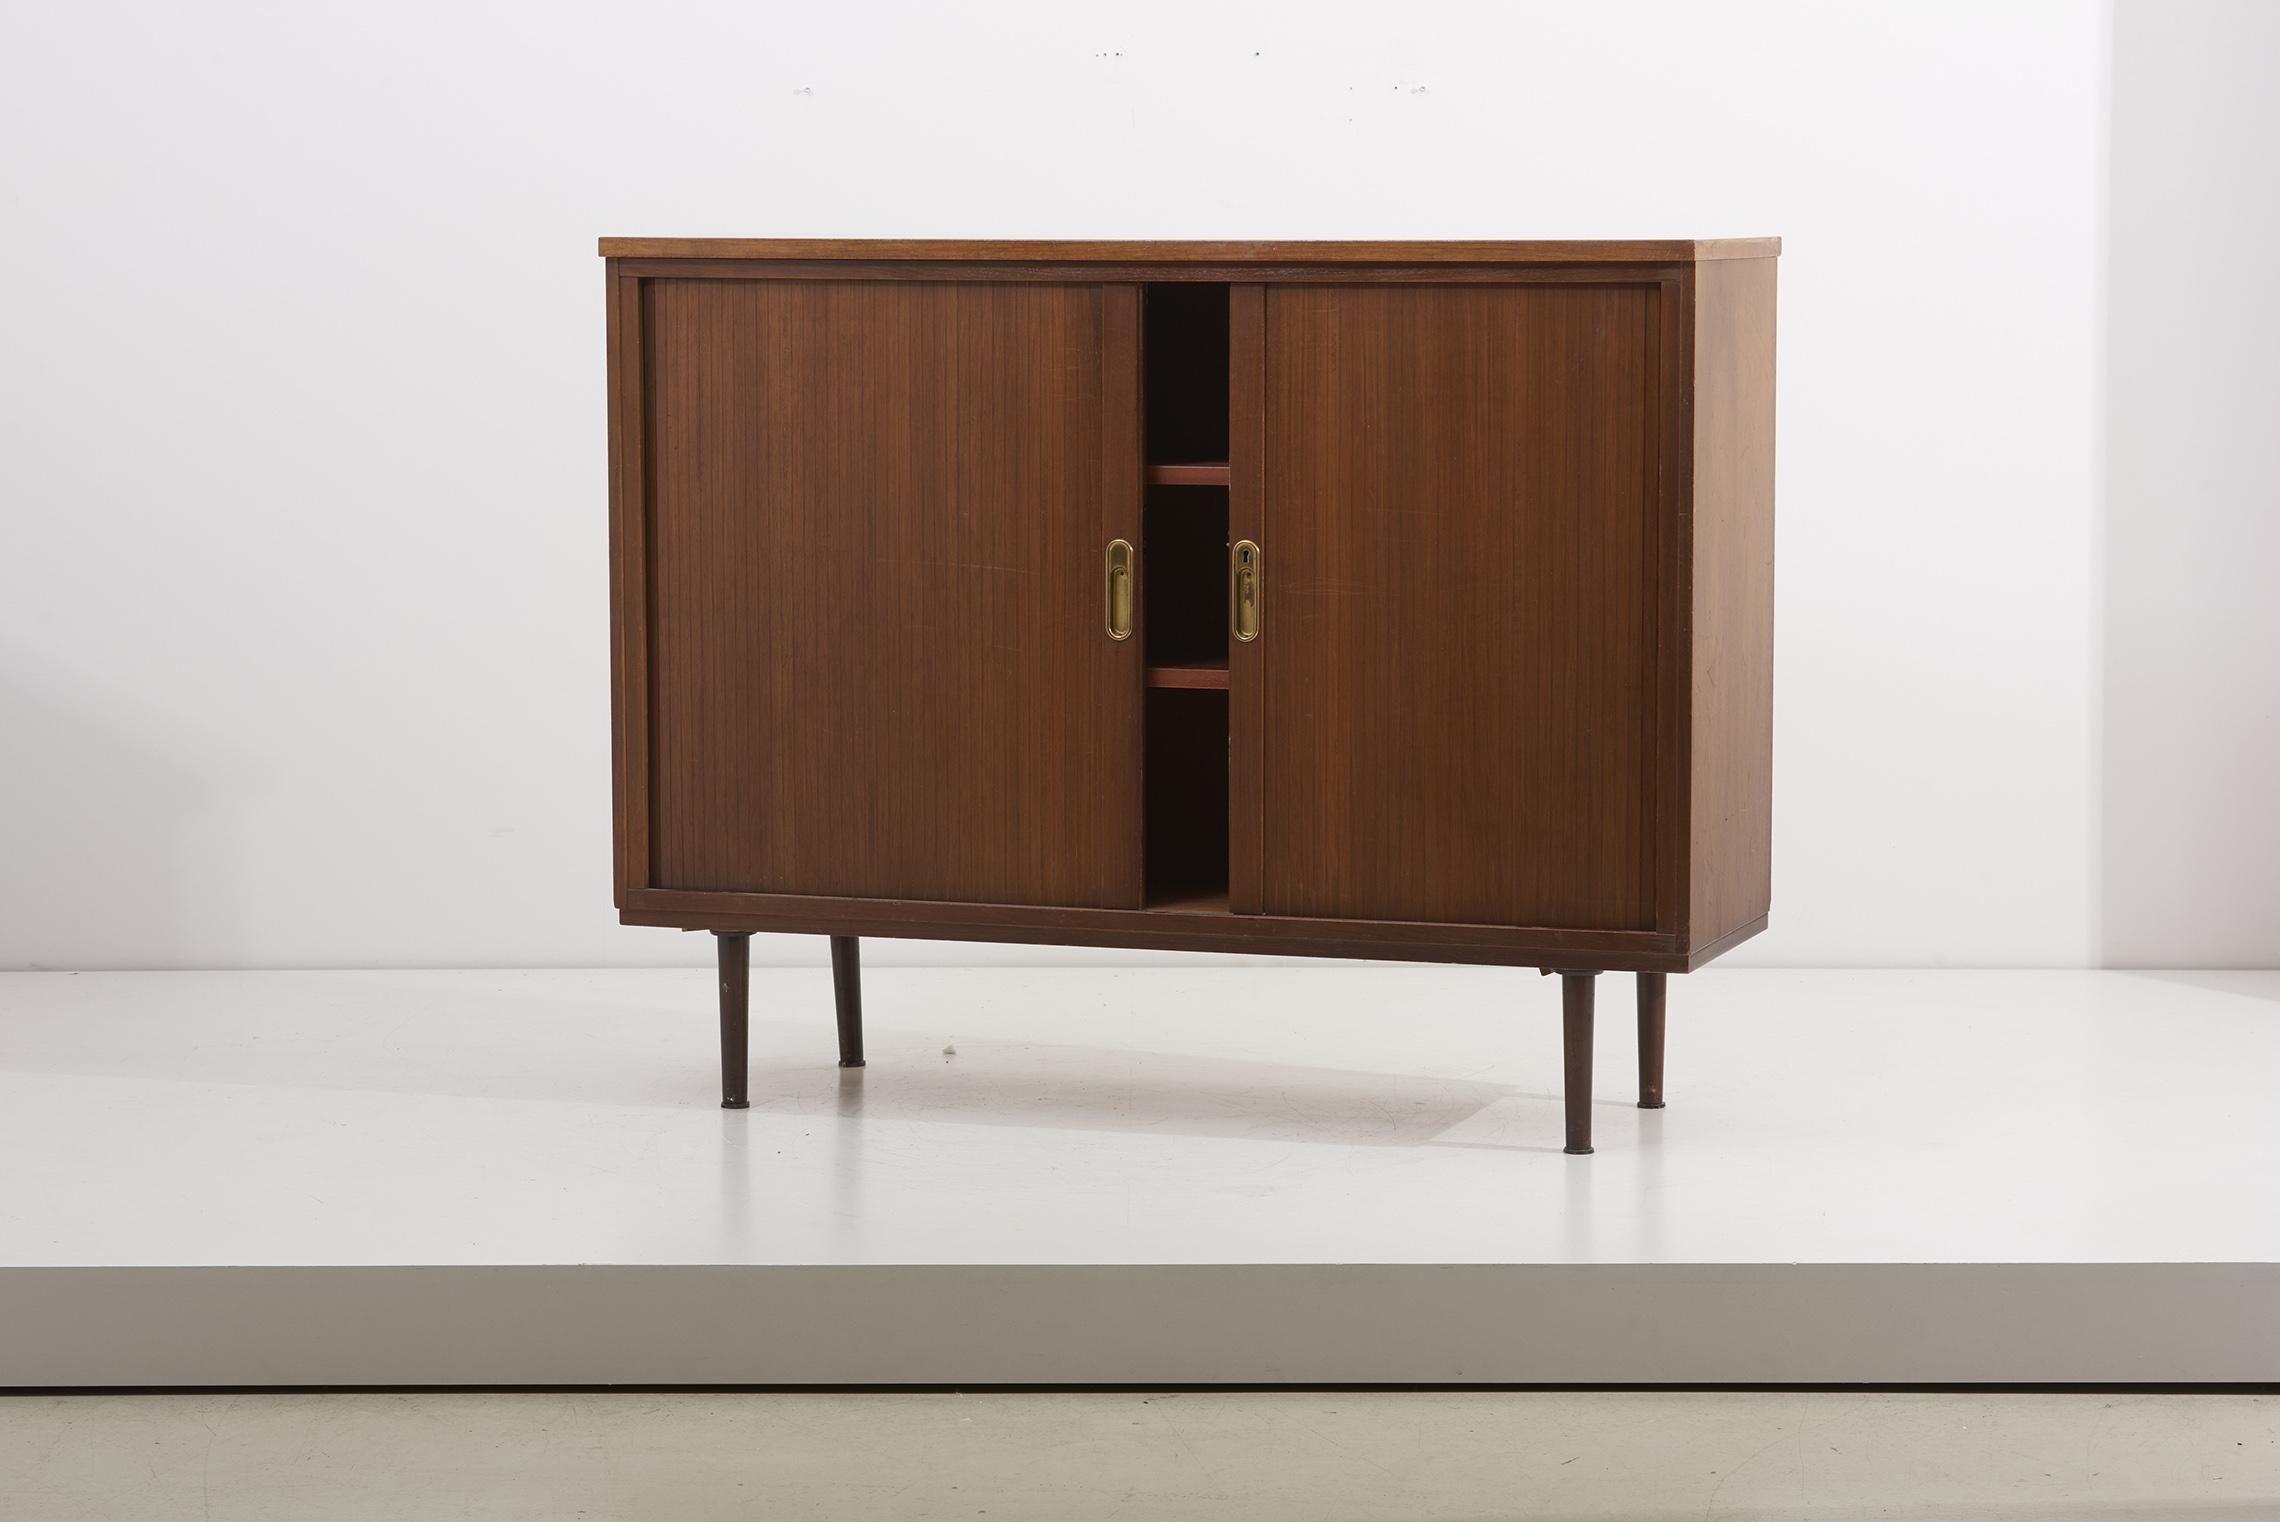 Mid-century Sideboard with three shelves and brass handles, 1960s.